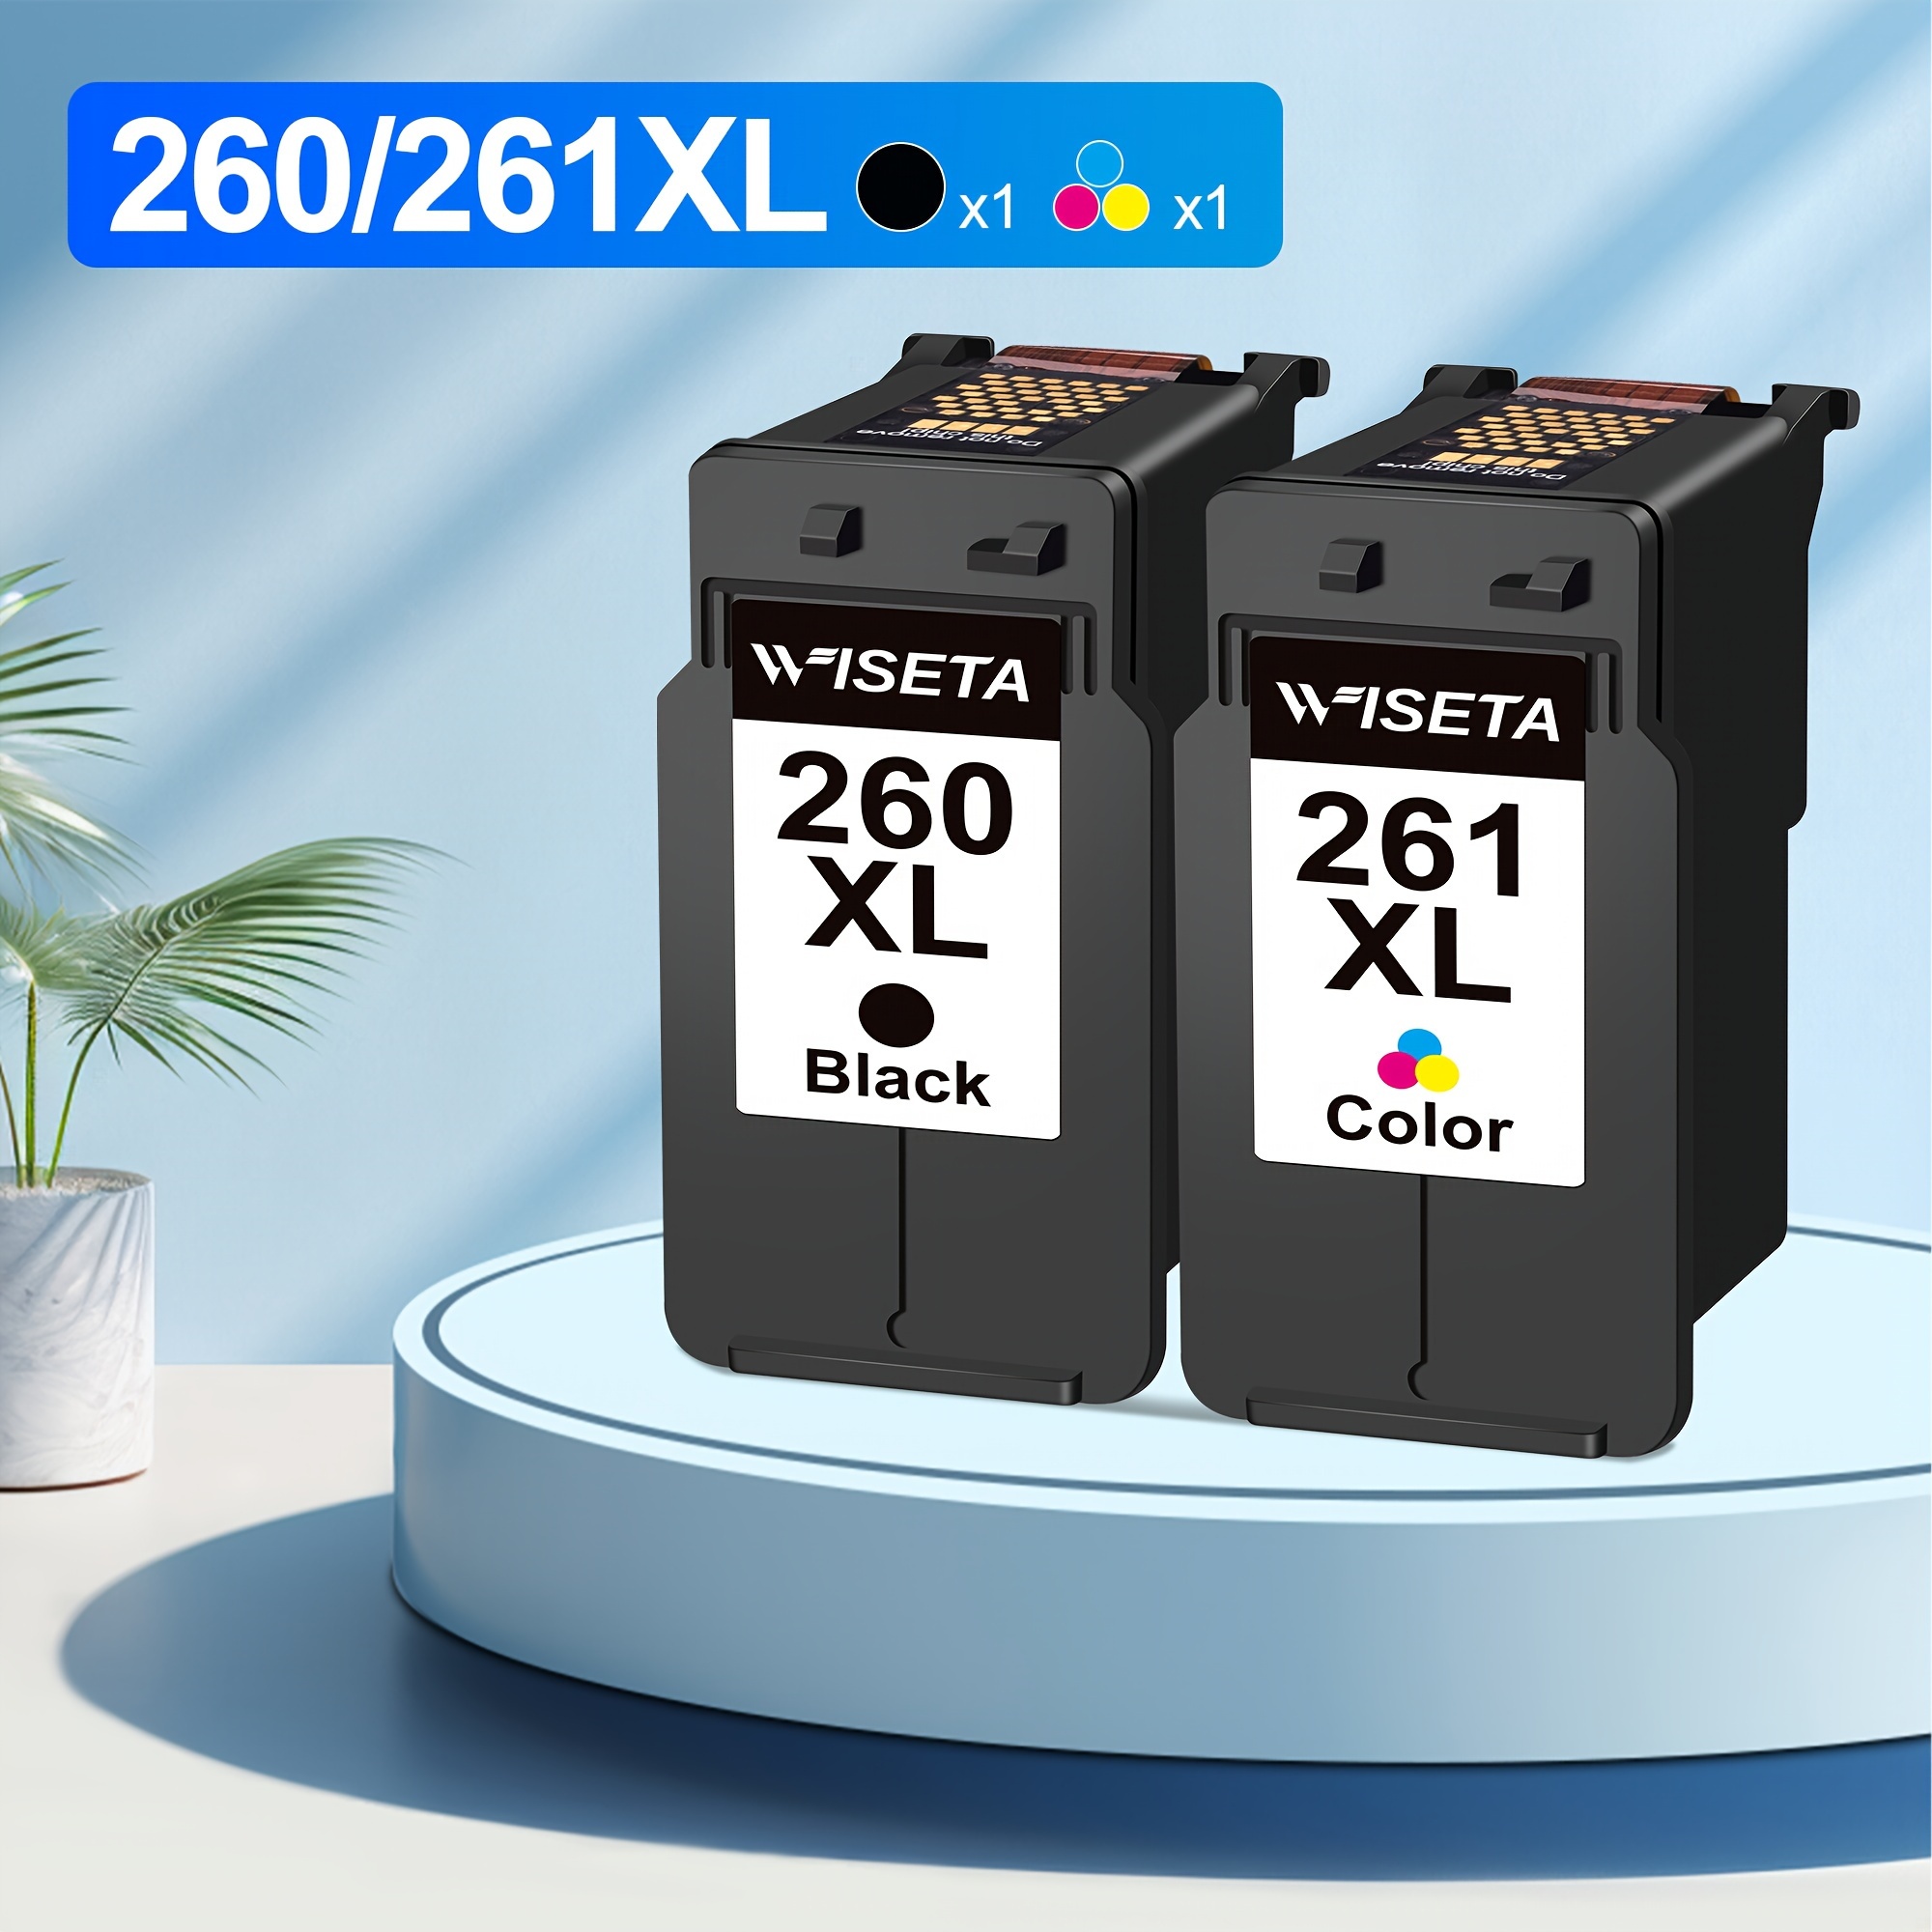 

2 Pack Pg-260xl Cl-261xl Ink Cartridge Replacement For 260 And 261 Ink Cartridges Fit For Pixma Tr7020 Ts6420 Tr7022 Ts5300 Ts5320 Printer (1 Black, 1 Color)